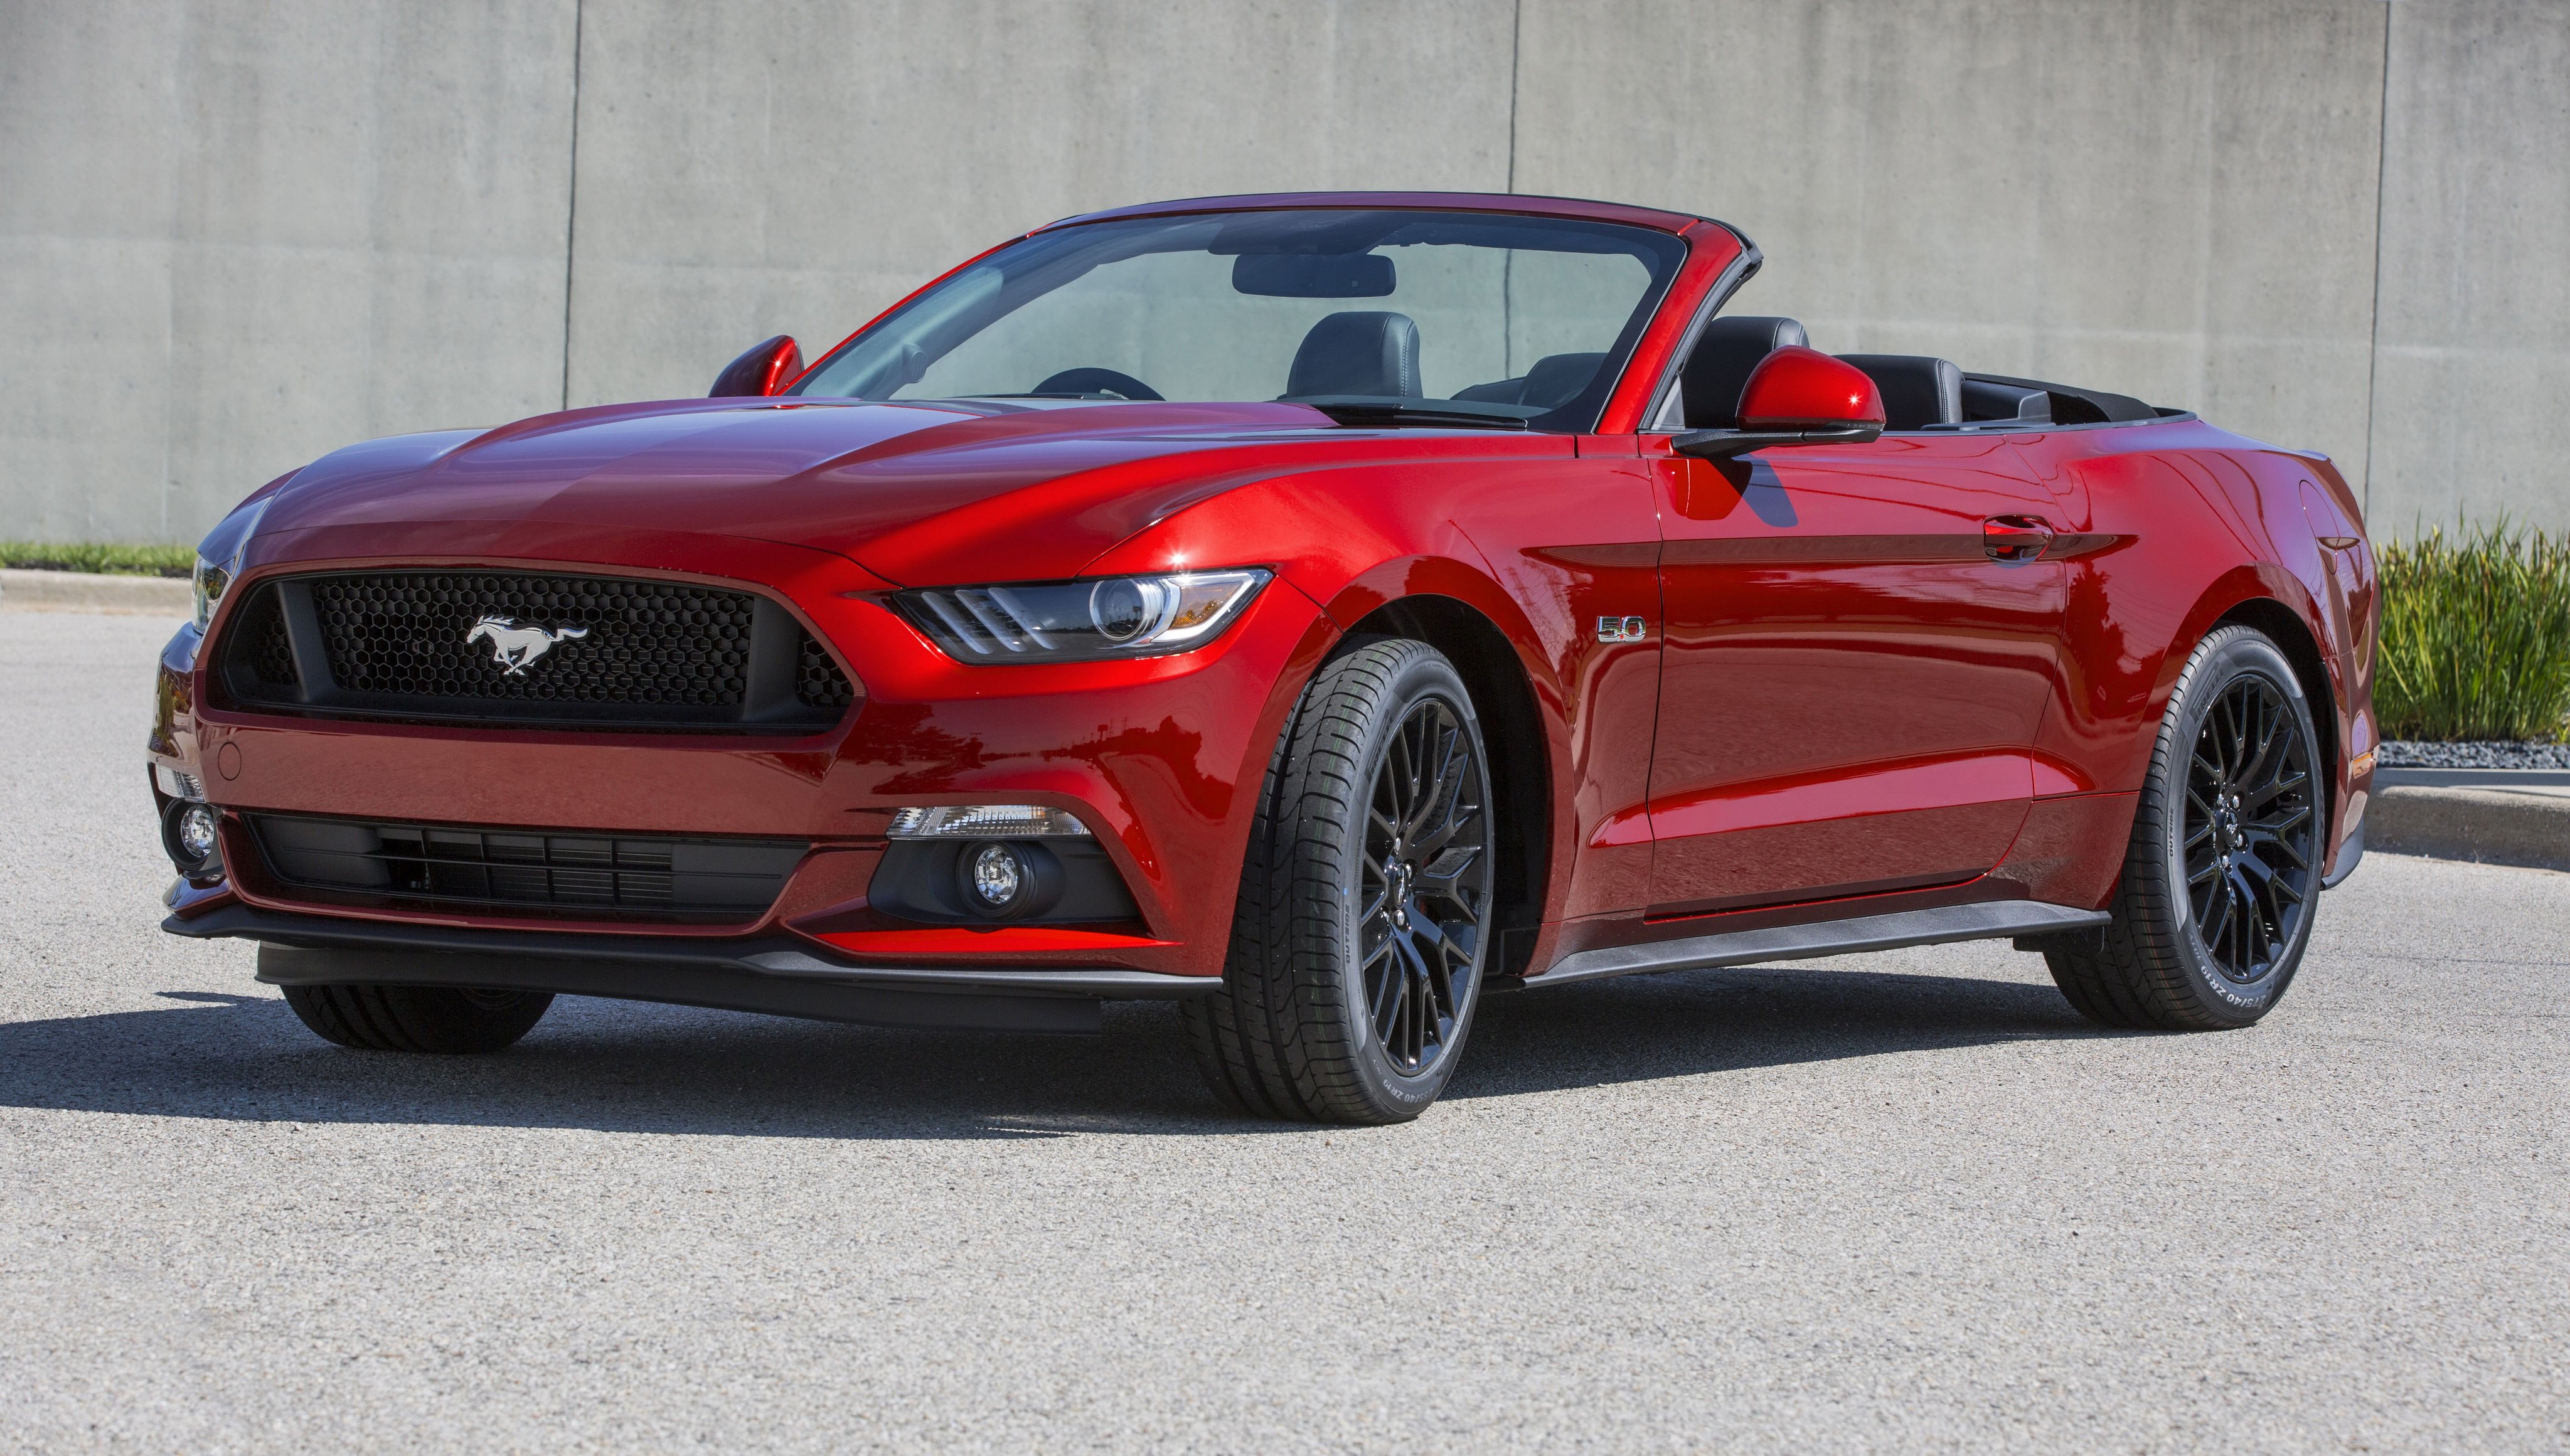 2015, Ford, Mustang, G t, Convertible, Au spec, Muscle Wallpaper